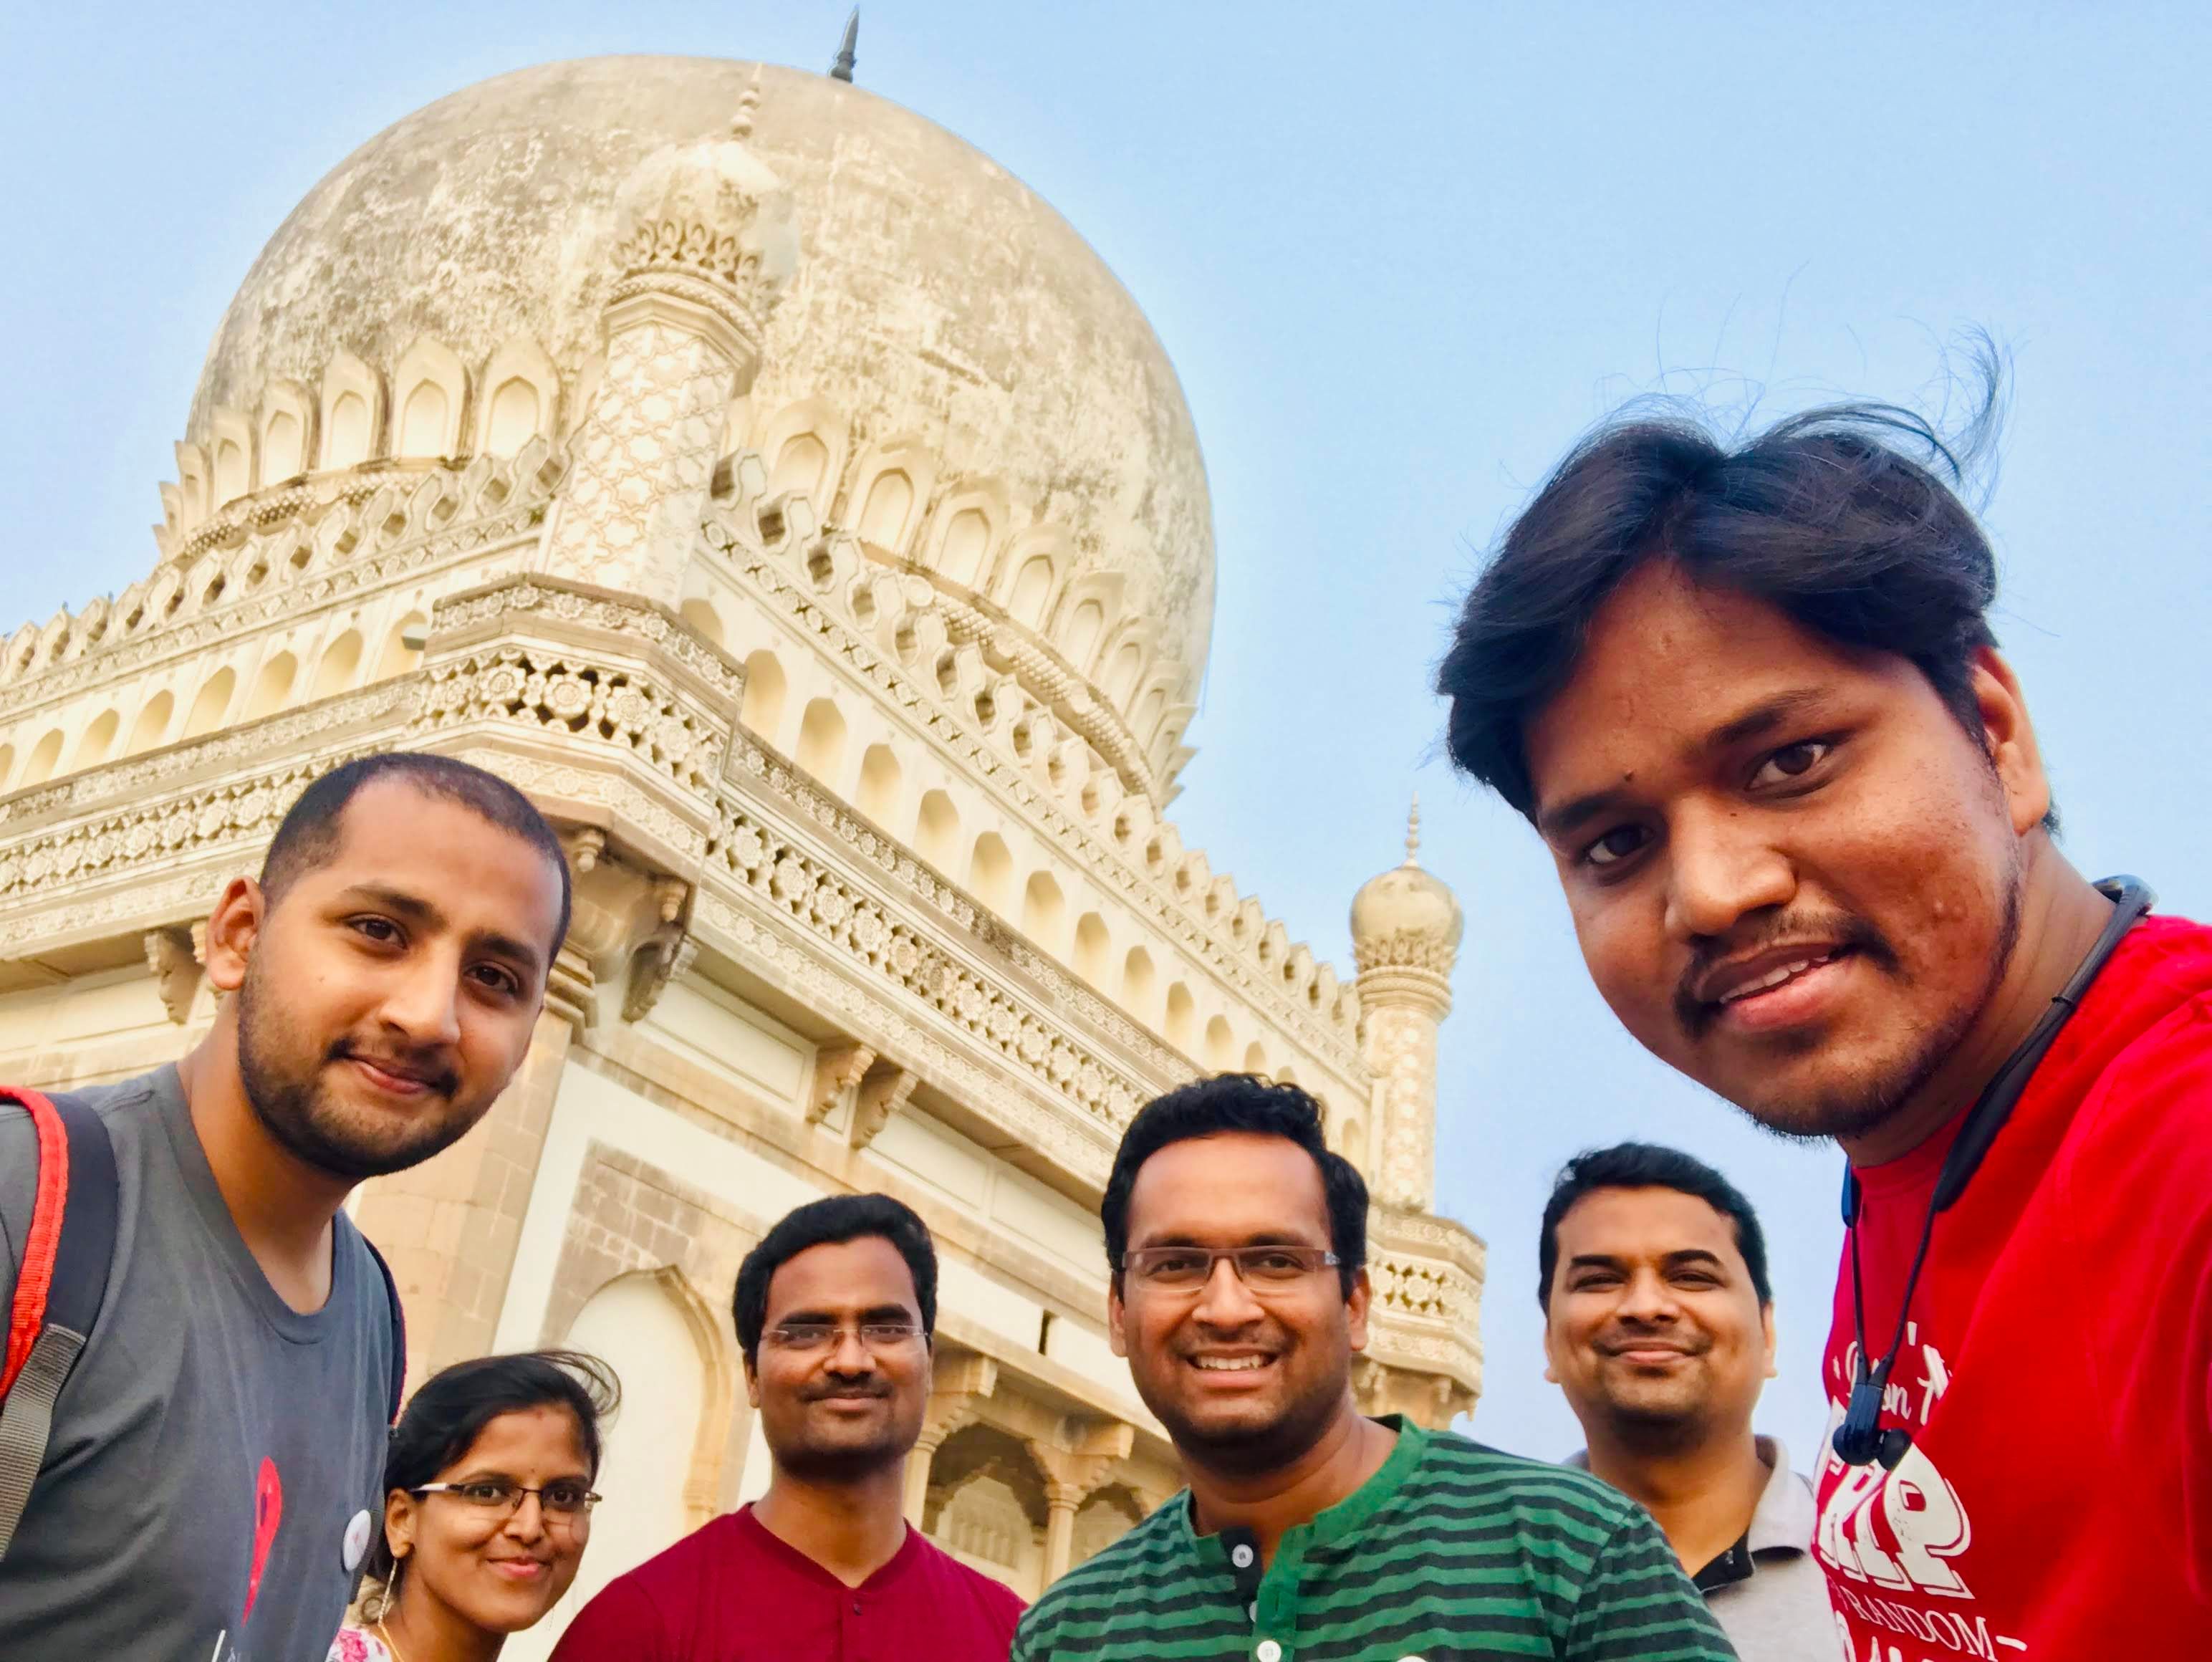 Selfie With Local guides with Qutub Shahi Tombs in the Background